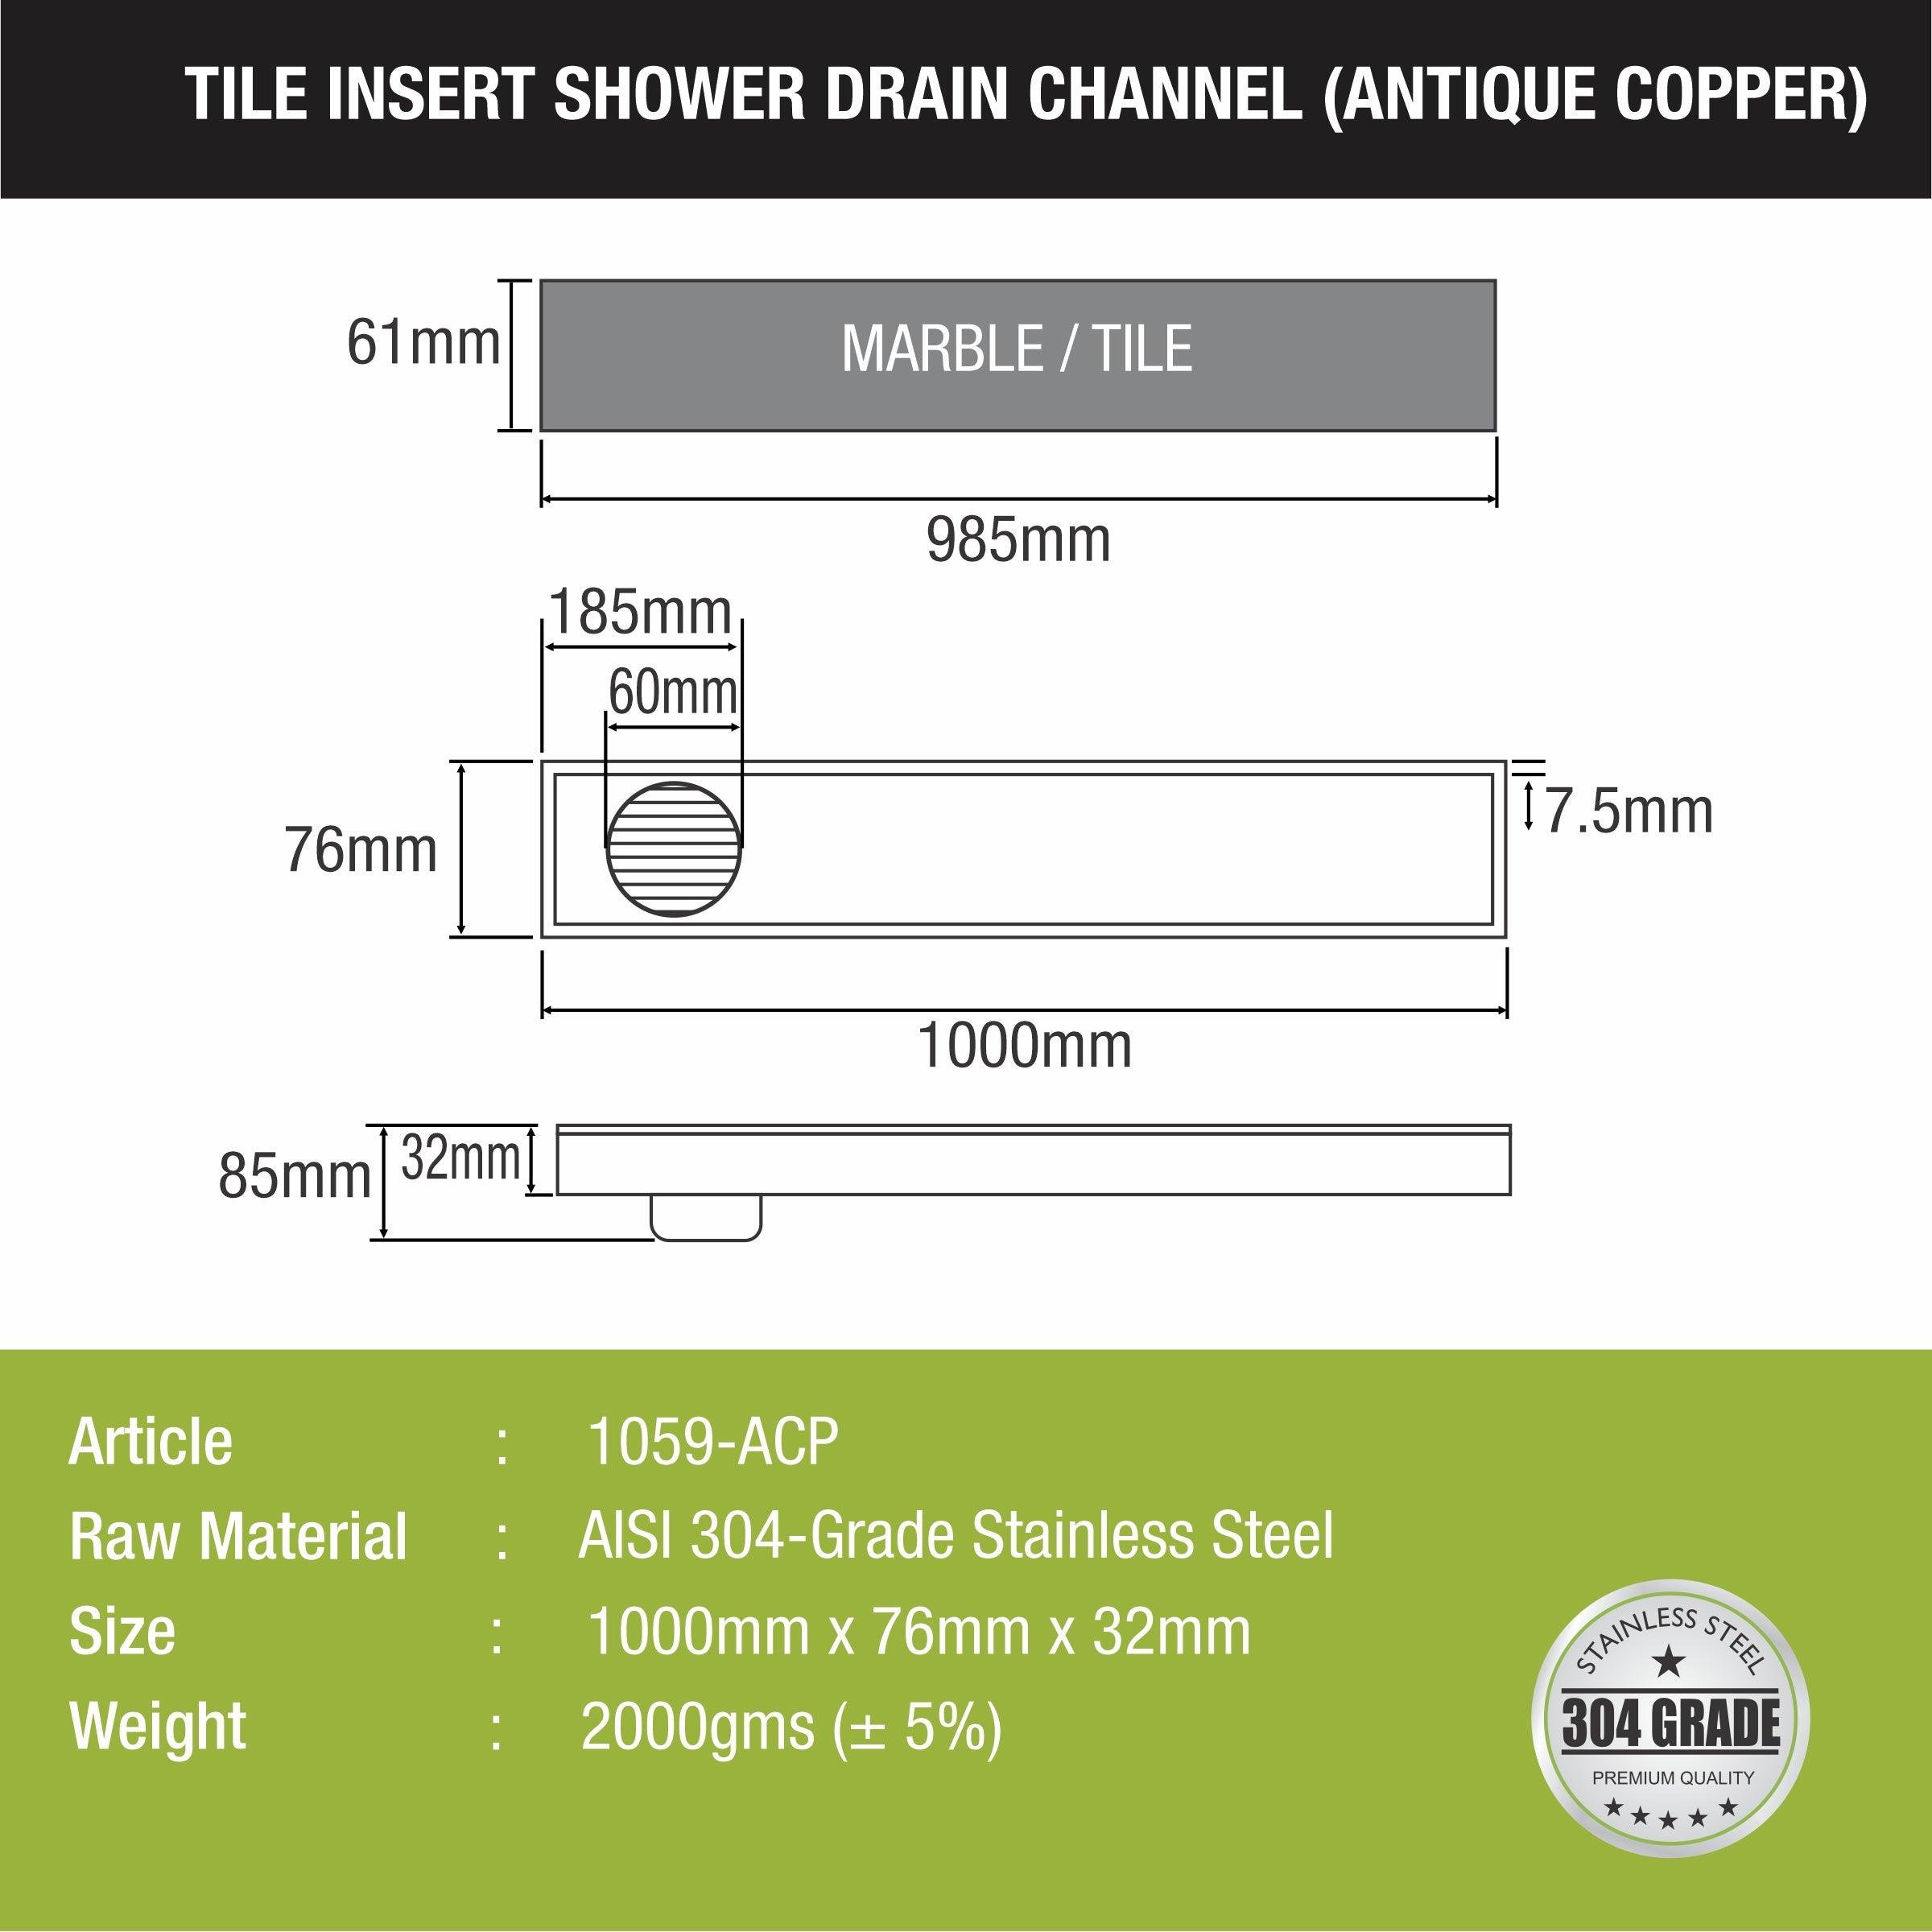 Tile Insert Shower Drain Channel - Antique Copper (40 x 3 Inches) sizes and dimensions